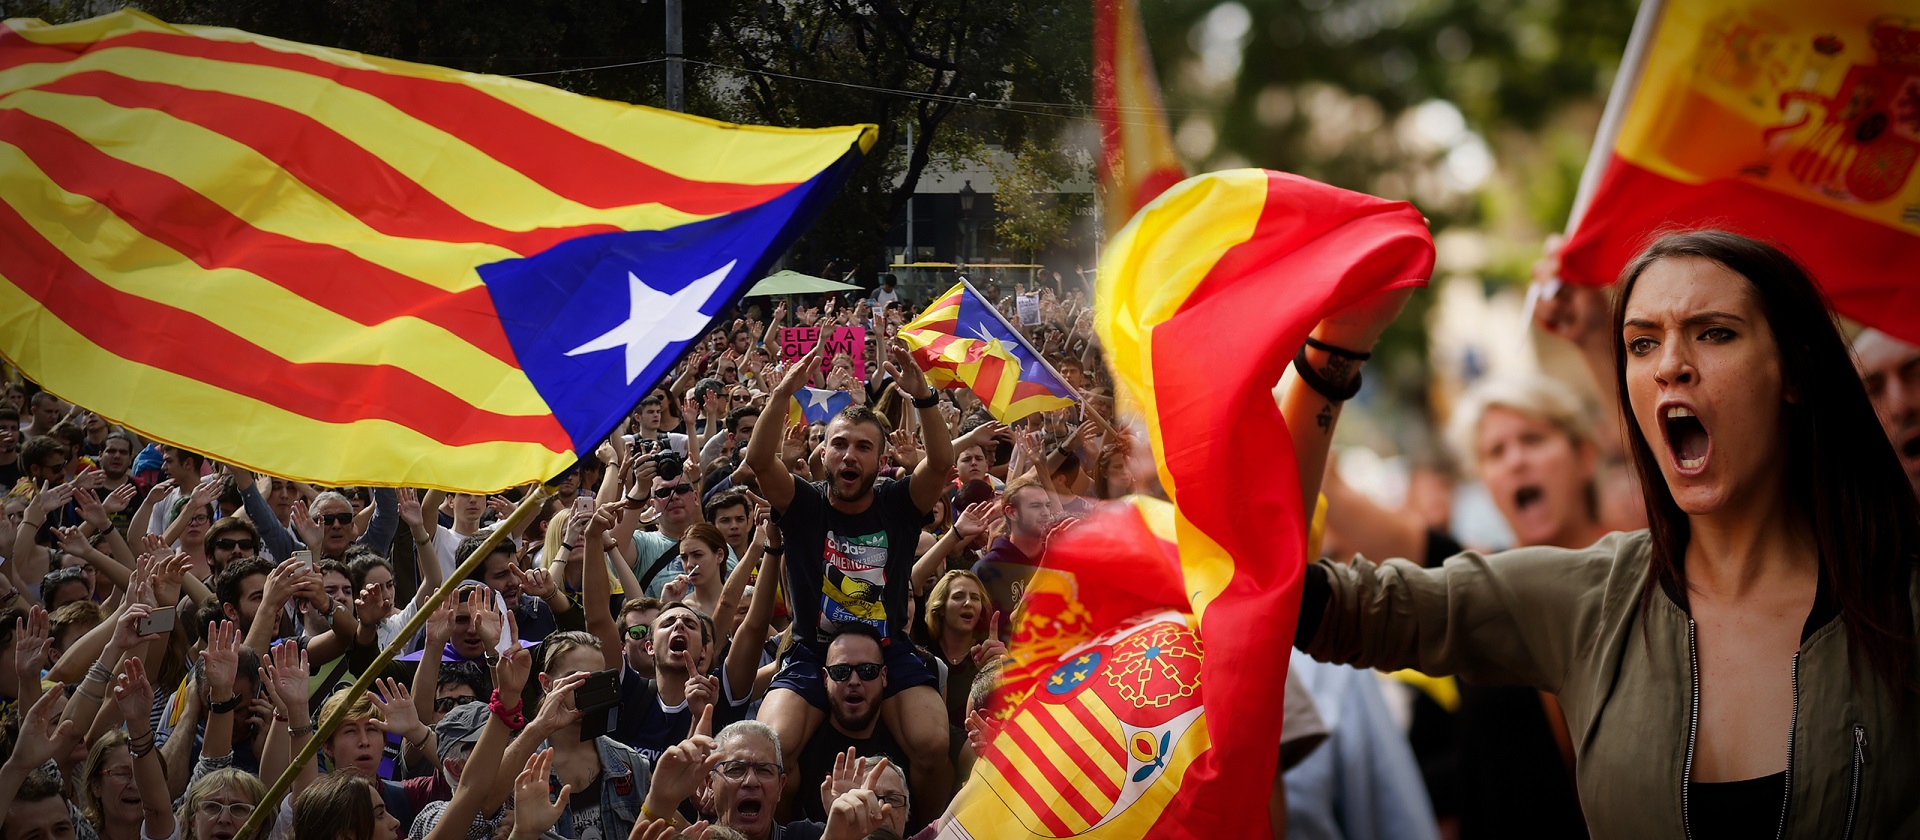 The Heat: Catalonia pushes for independence from Spain